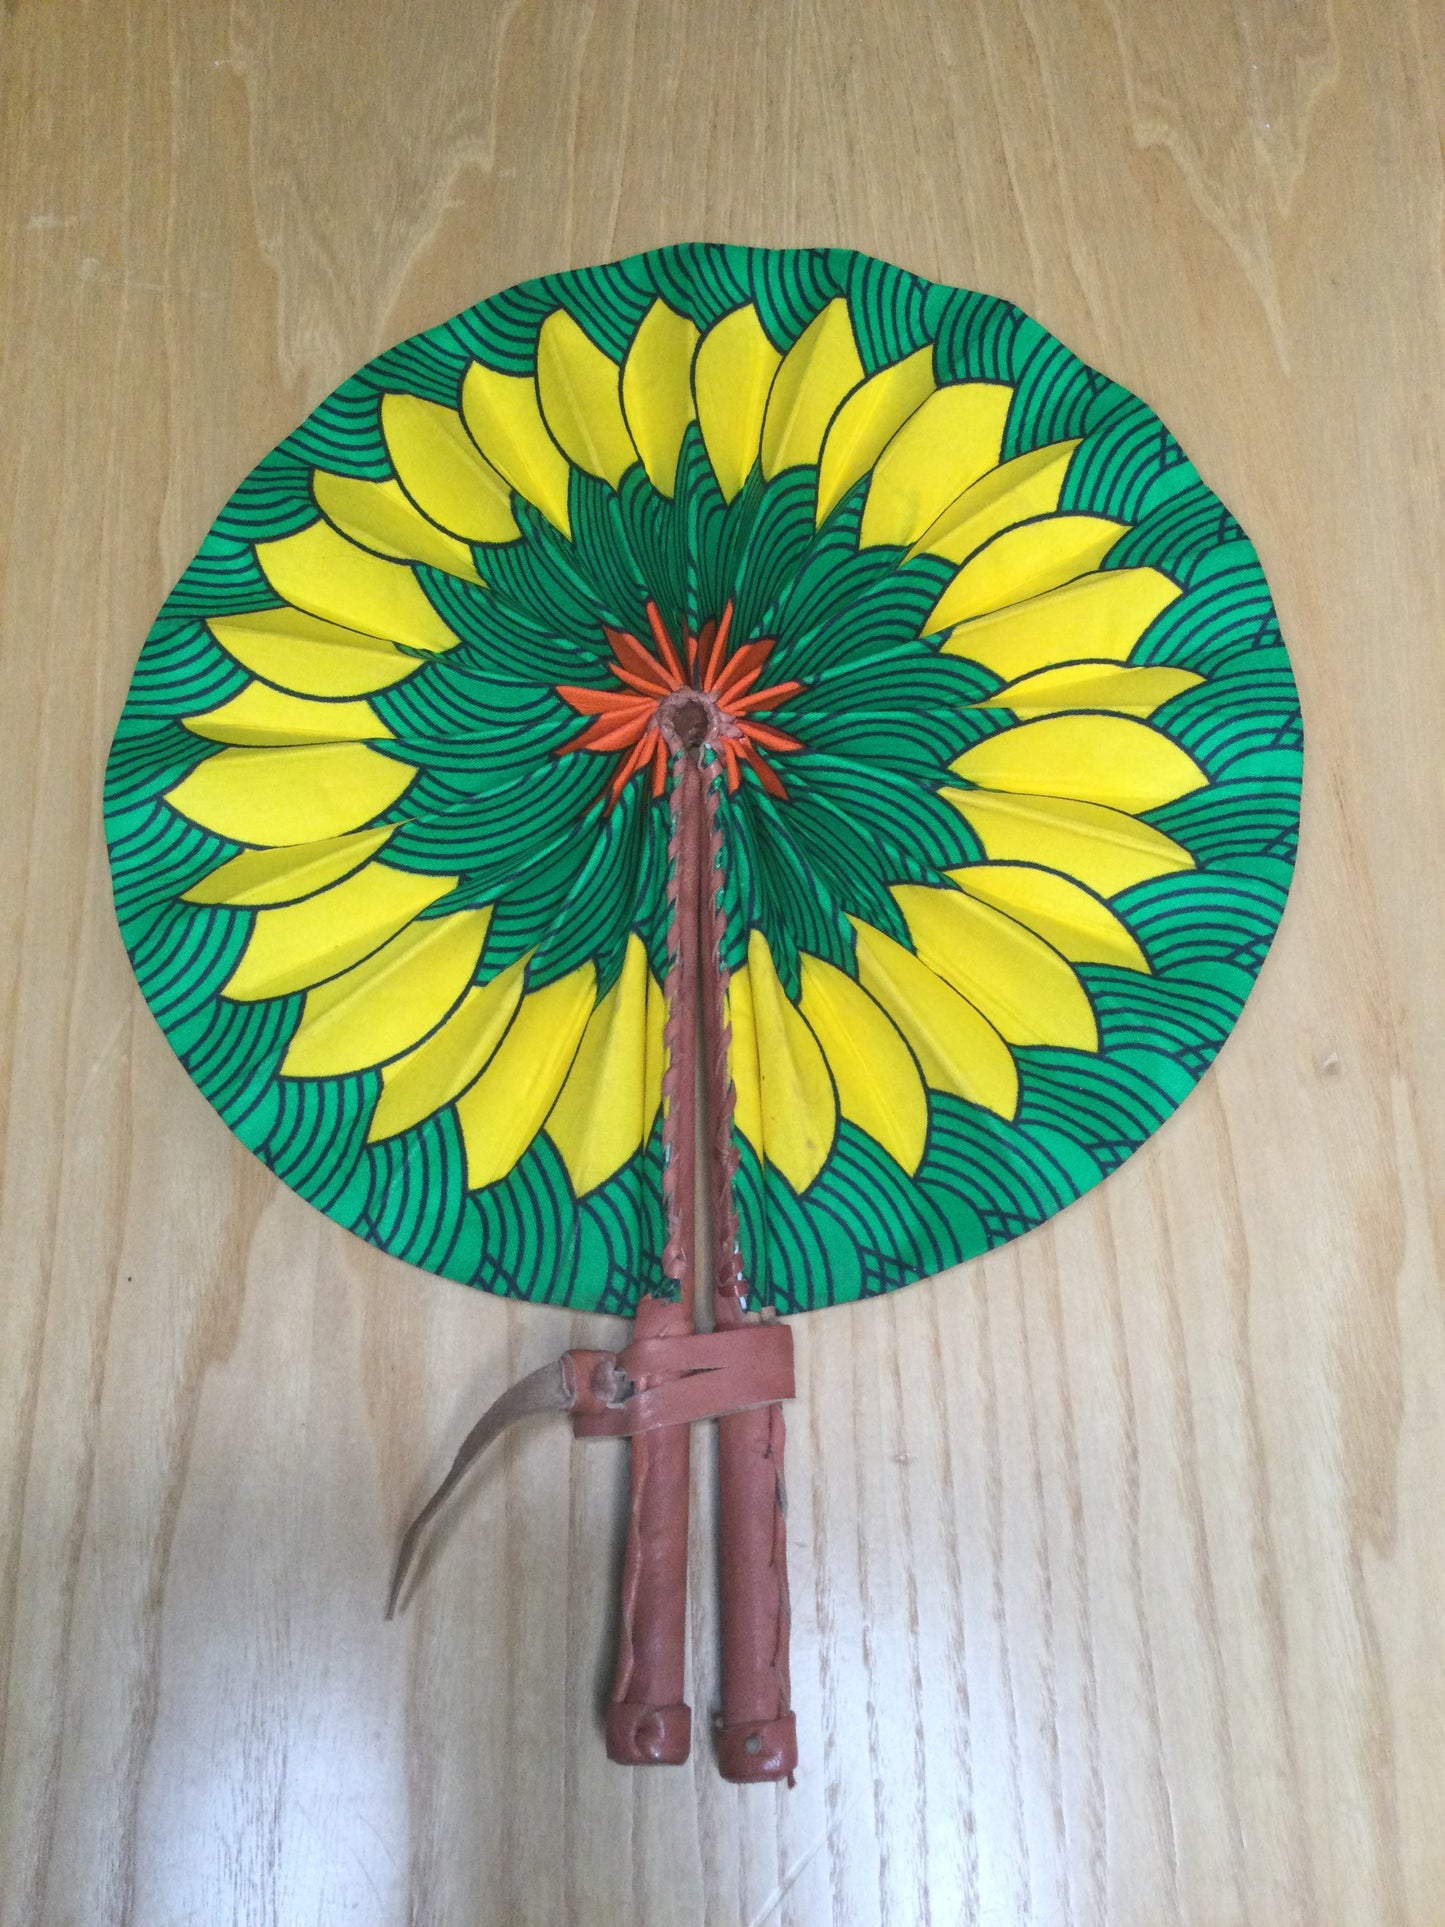 Hand held fan crafted with Delightfully bright African print